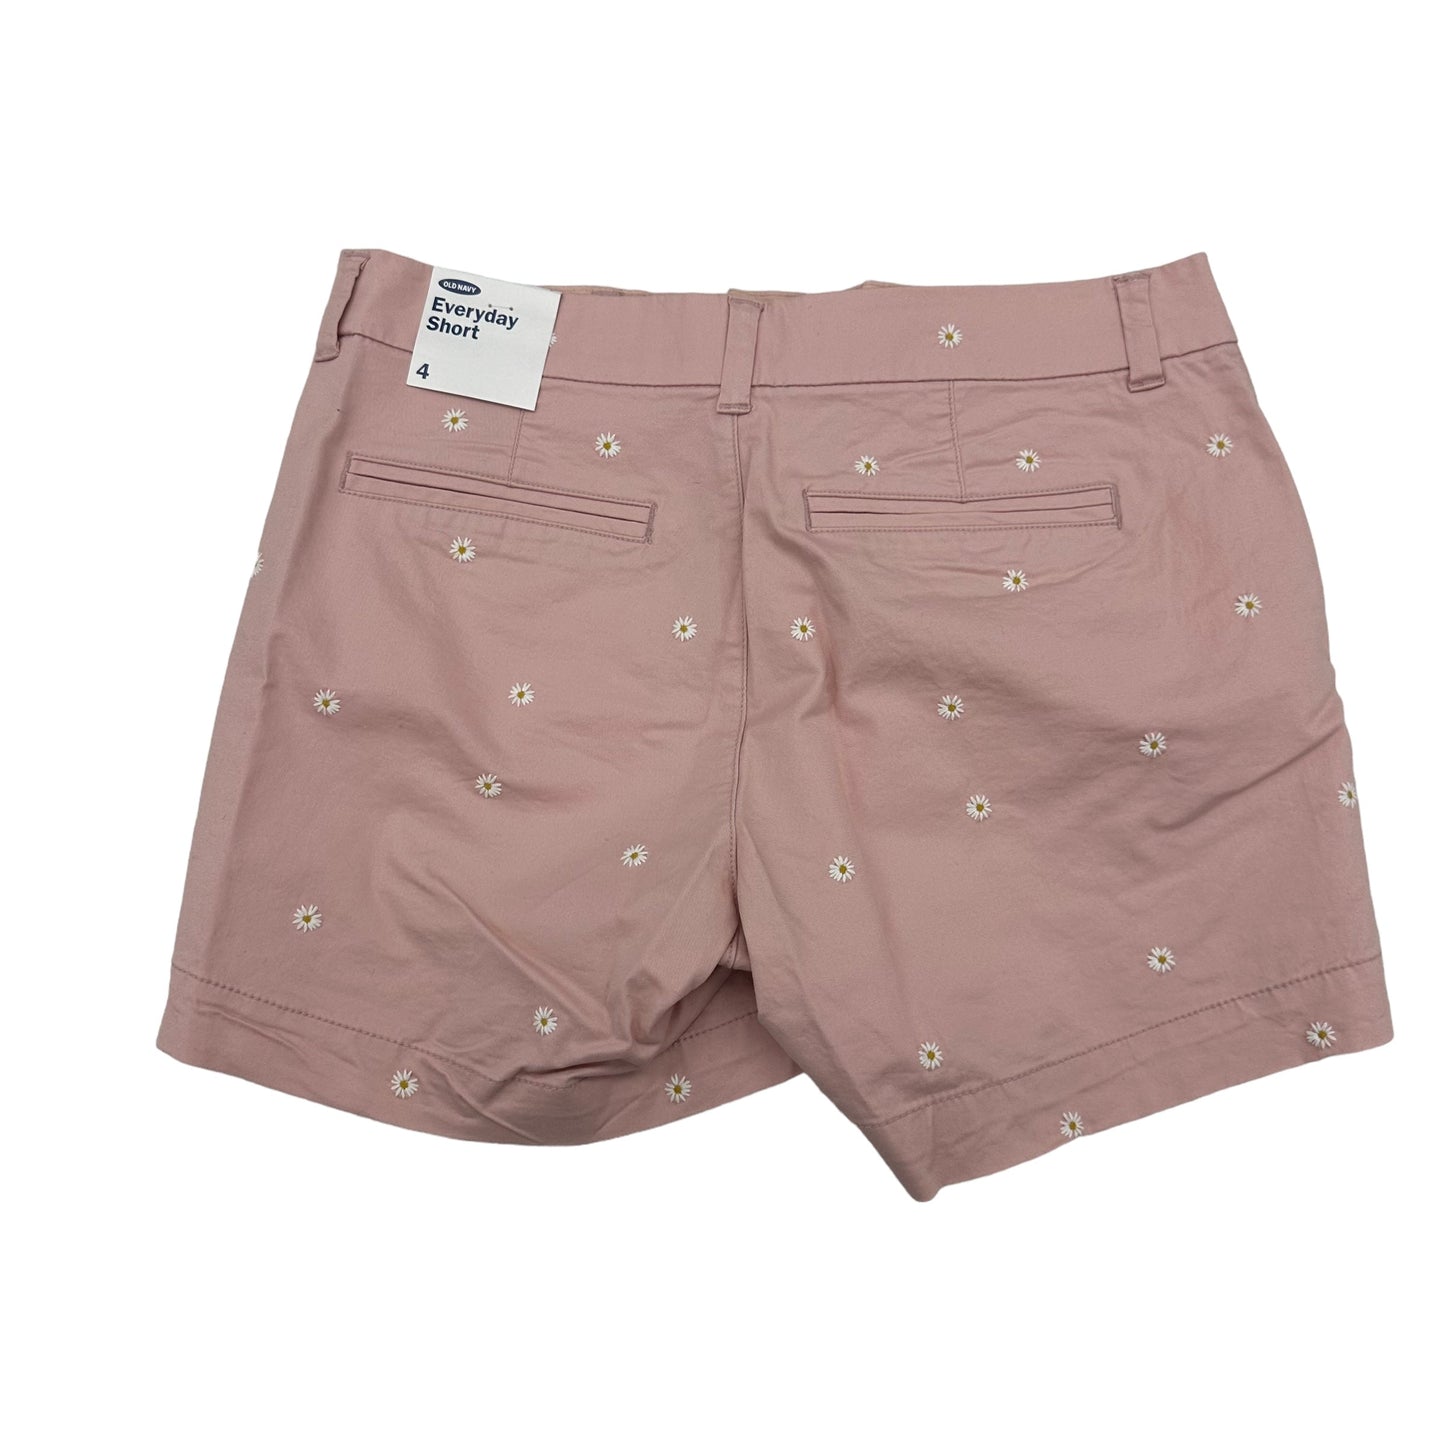 Shorts By Old Navy  Size: 4